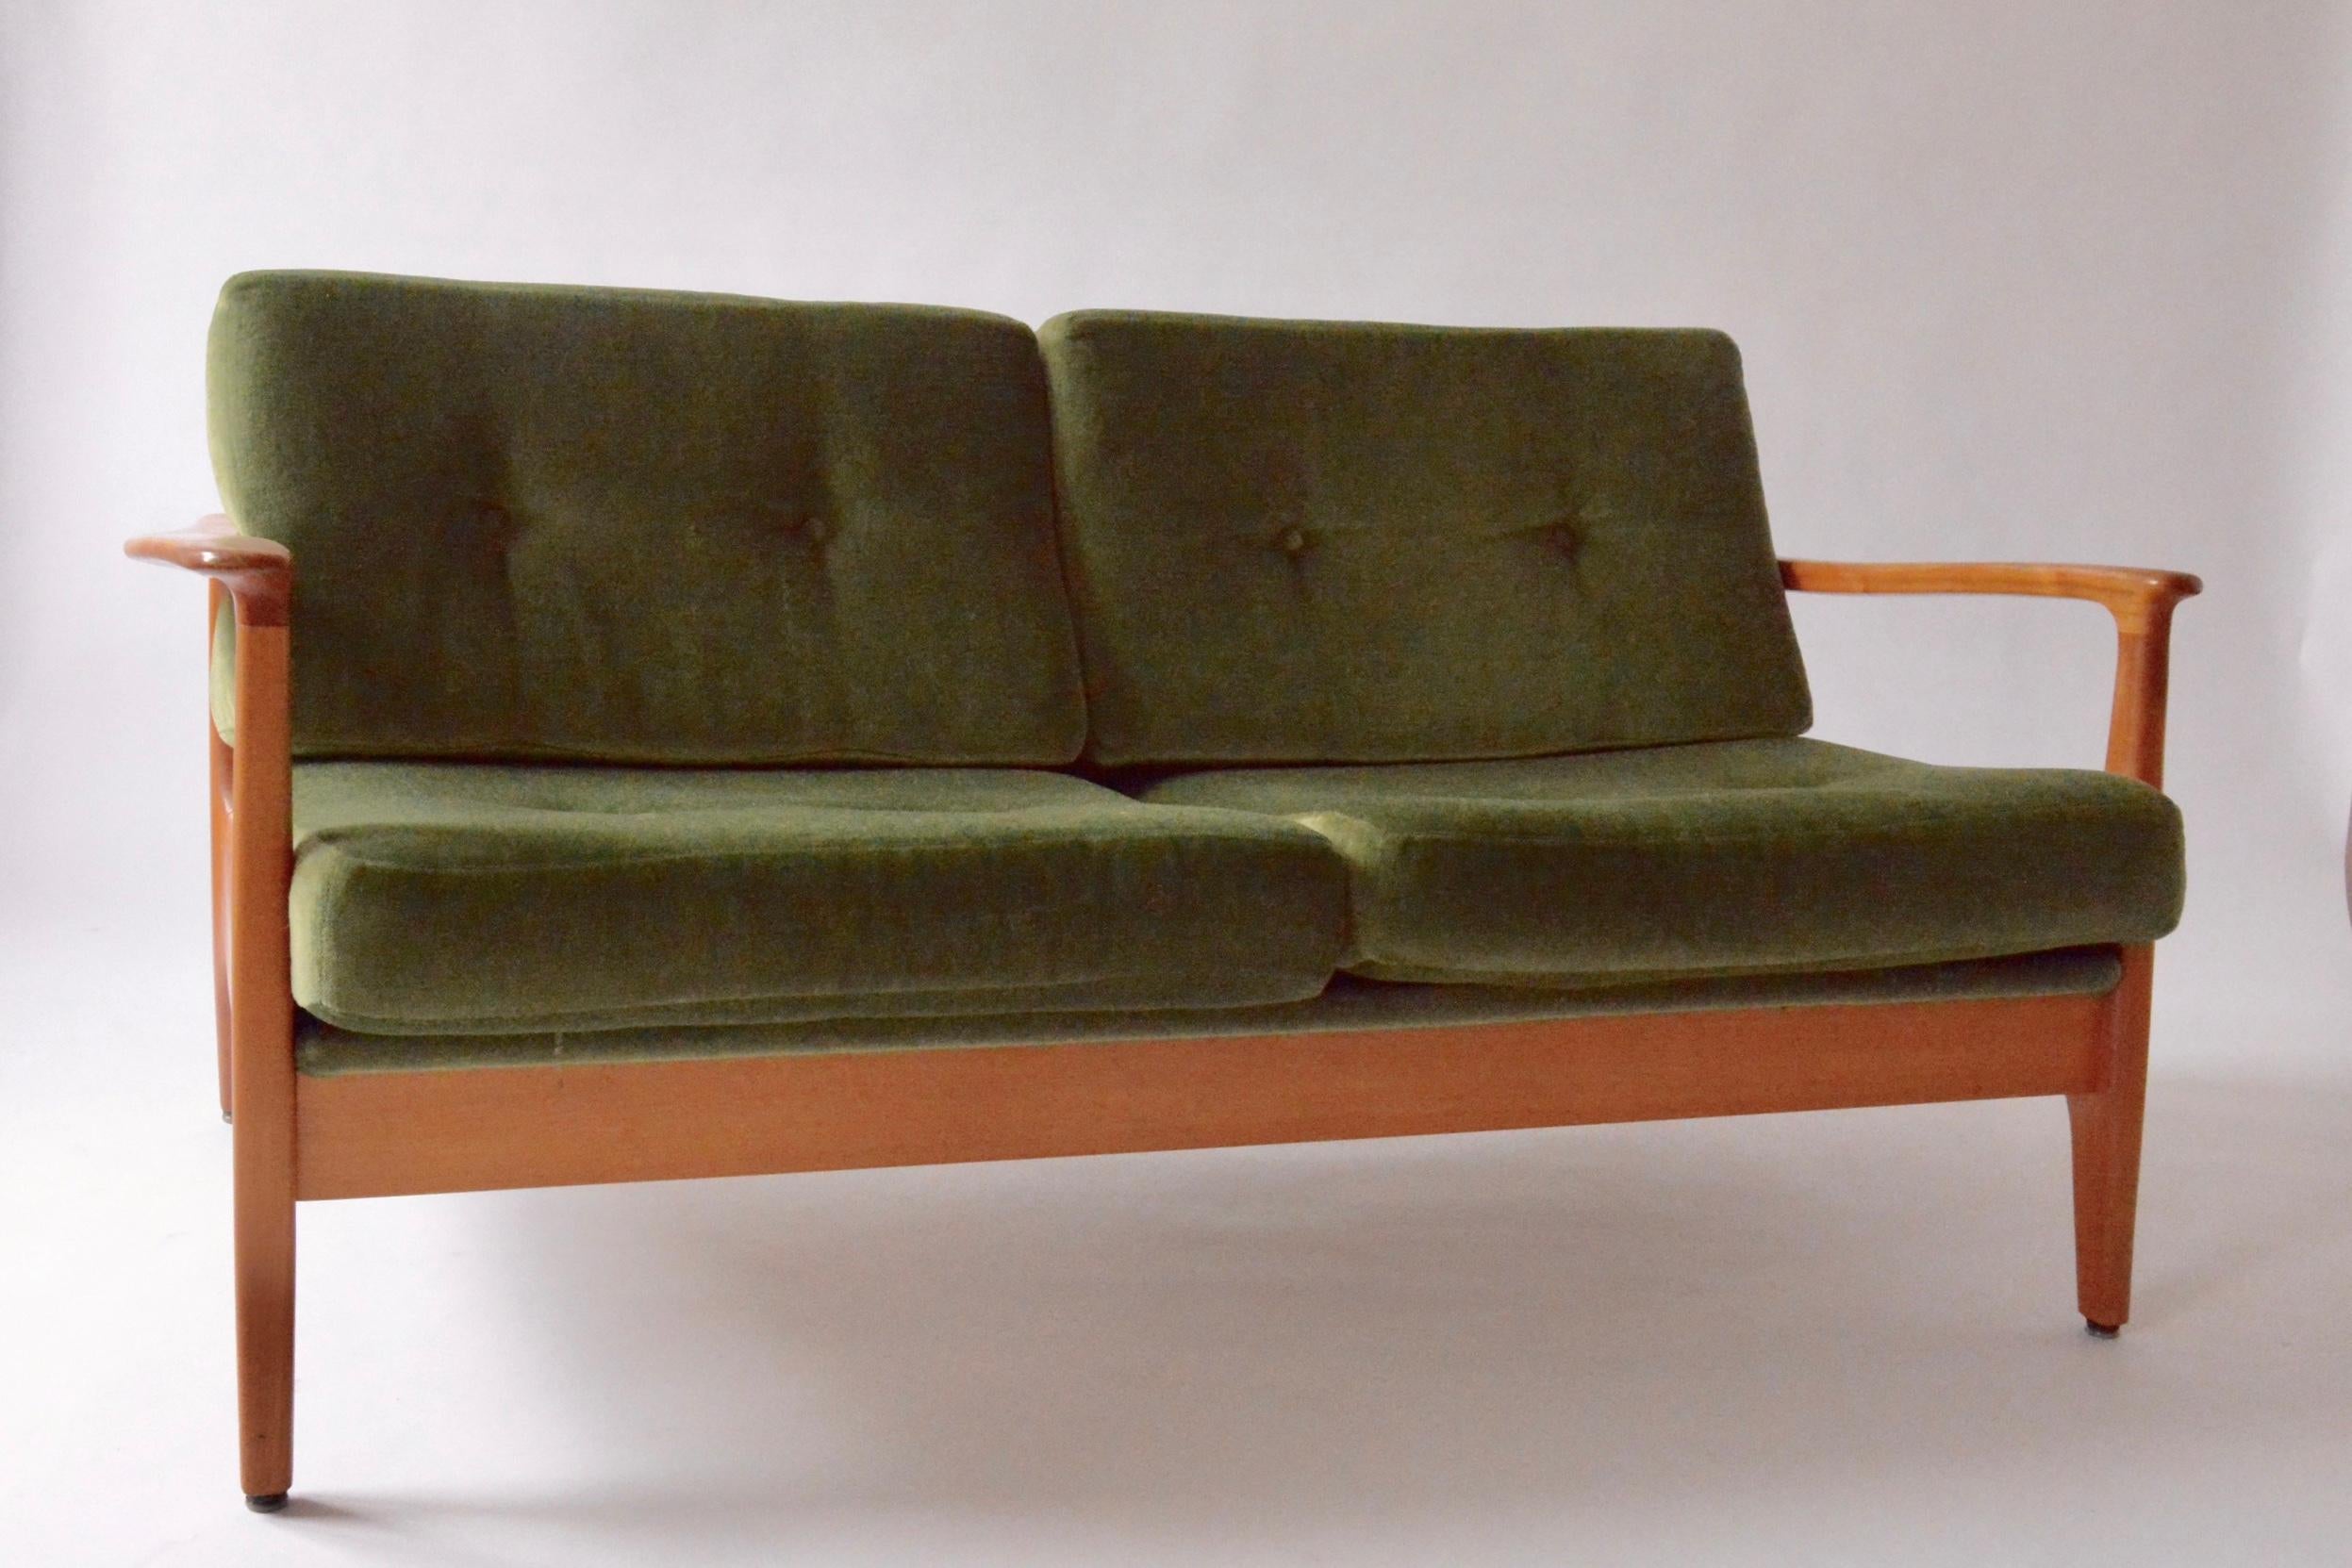 This very rare Eugen Schmidt 2-seater has a beautiful and organic shaped frame of massive cherry. The design was made for the German government buildings in the 1960s. As seen with mohair velvet cushions and very carefully handcrafted wooden